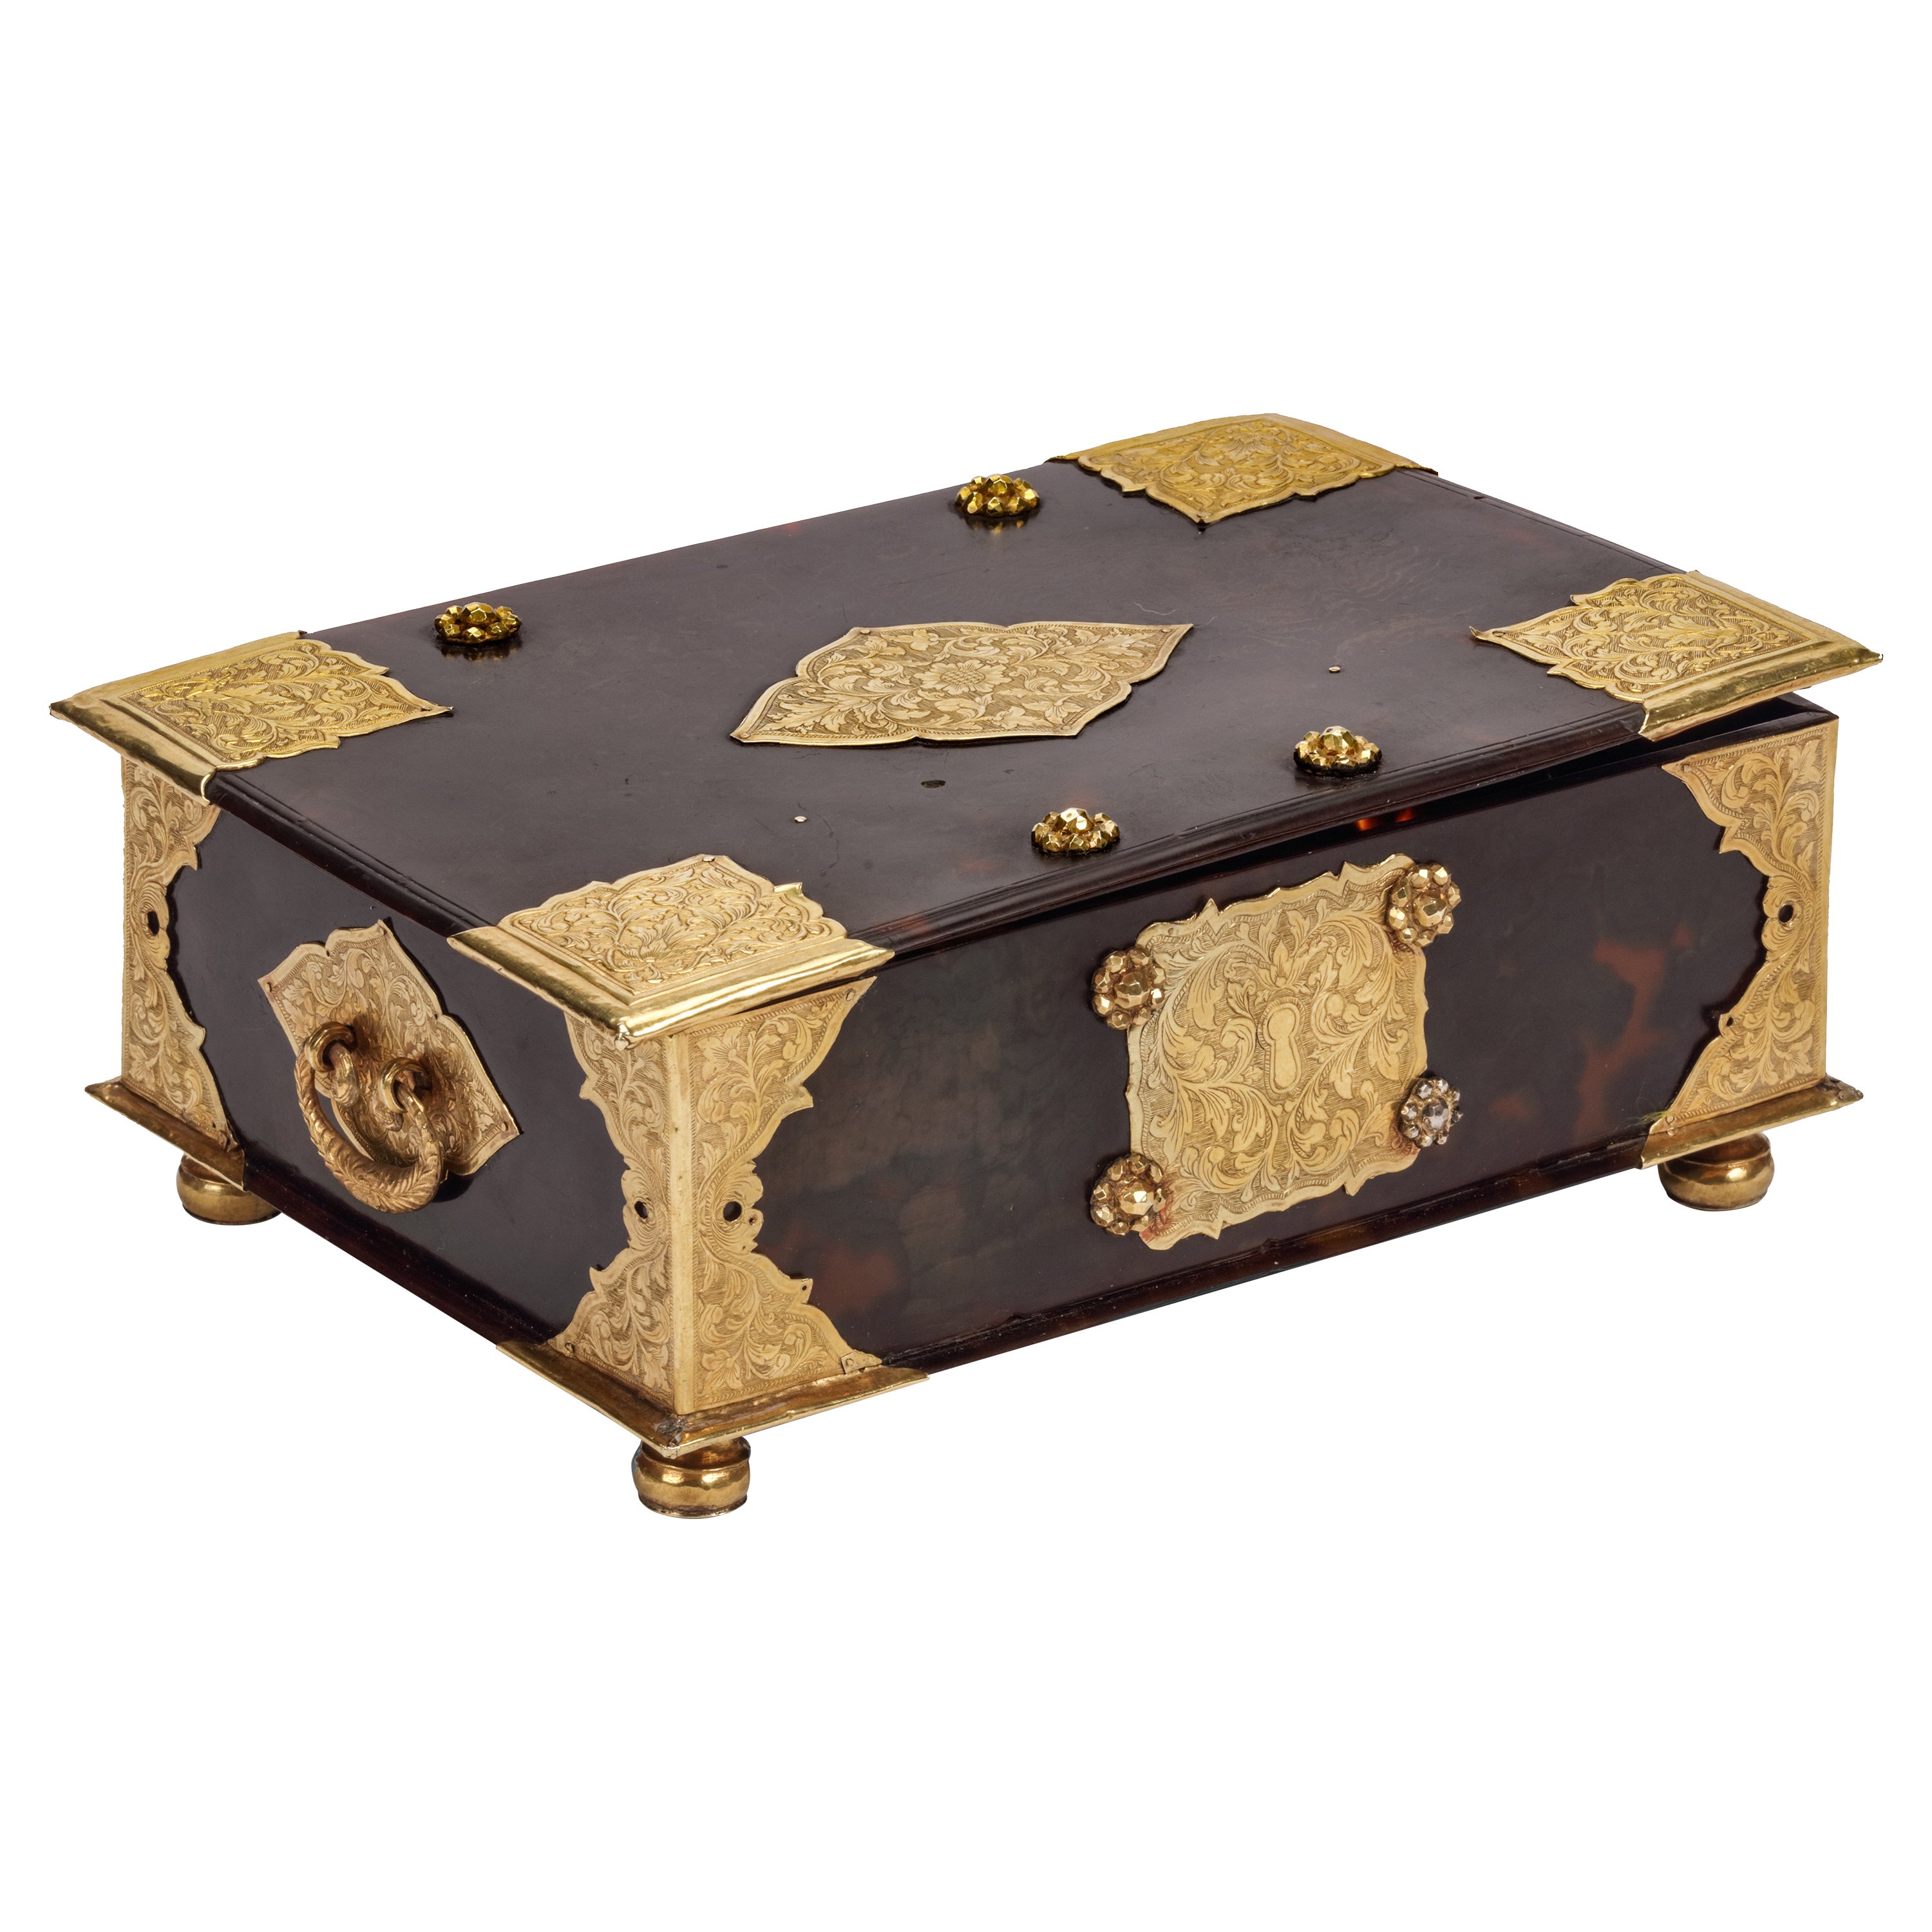 A rare Indonesian tortoiseshell sirih casket with gold mounts